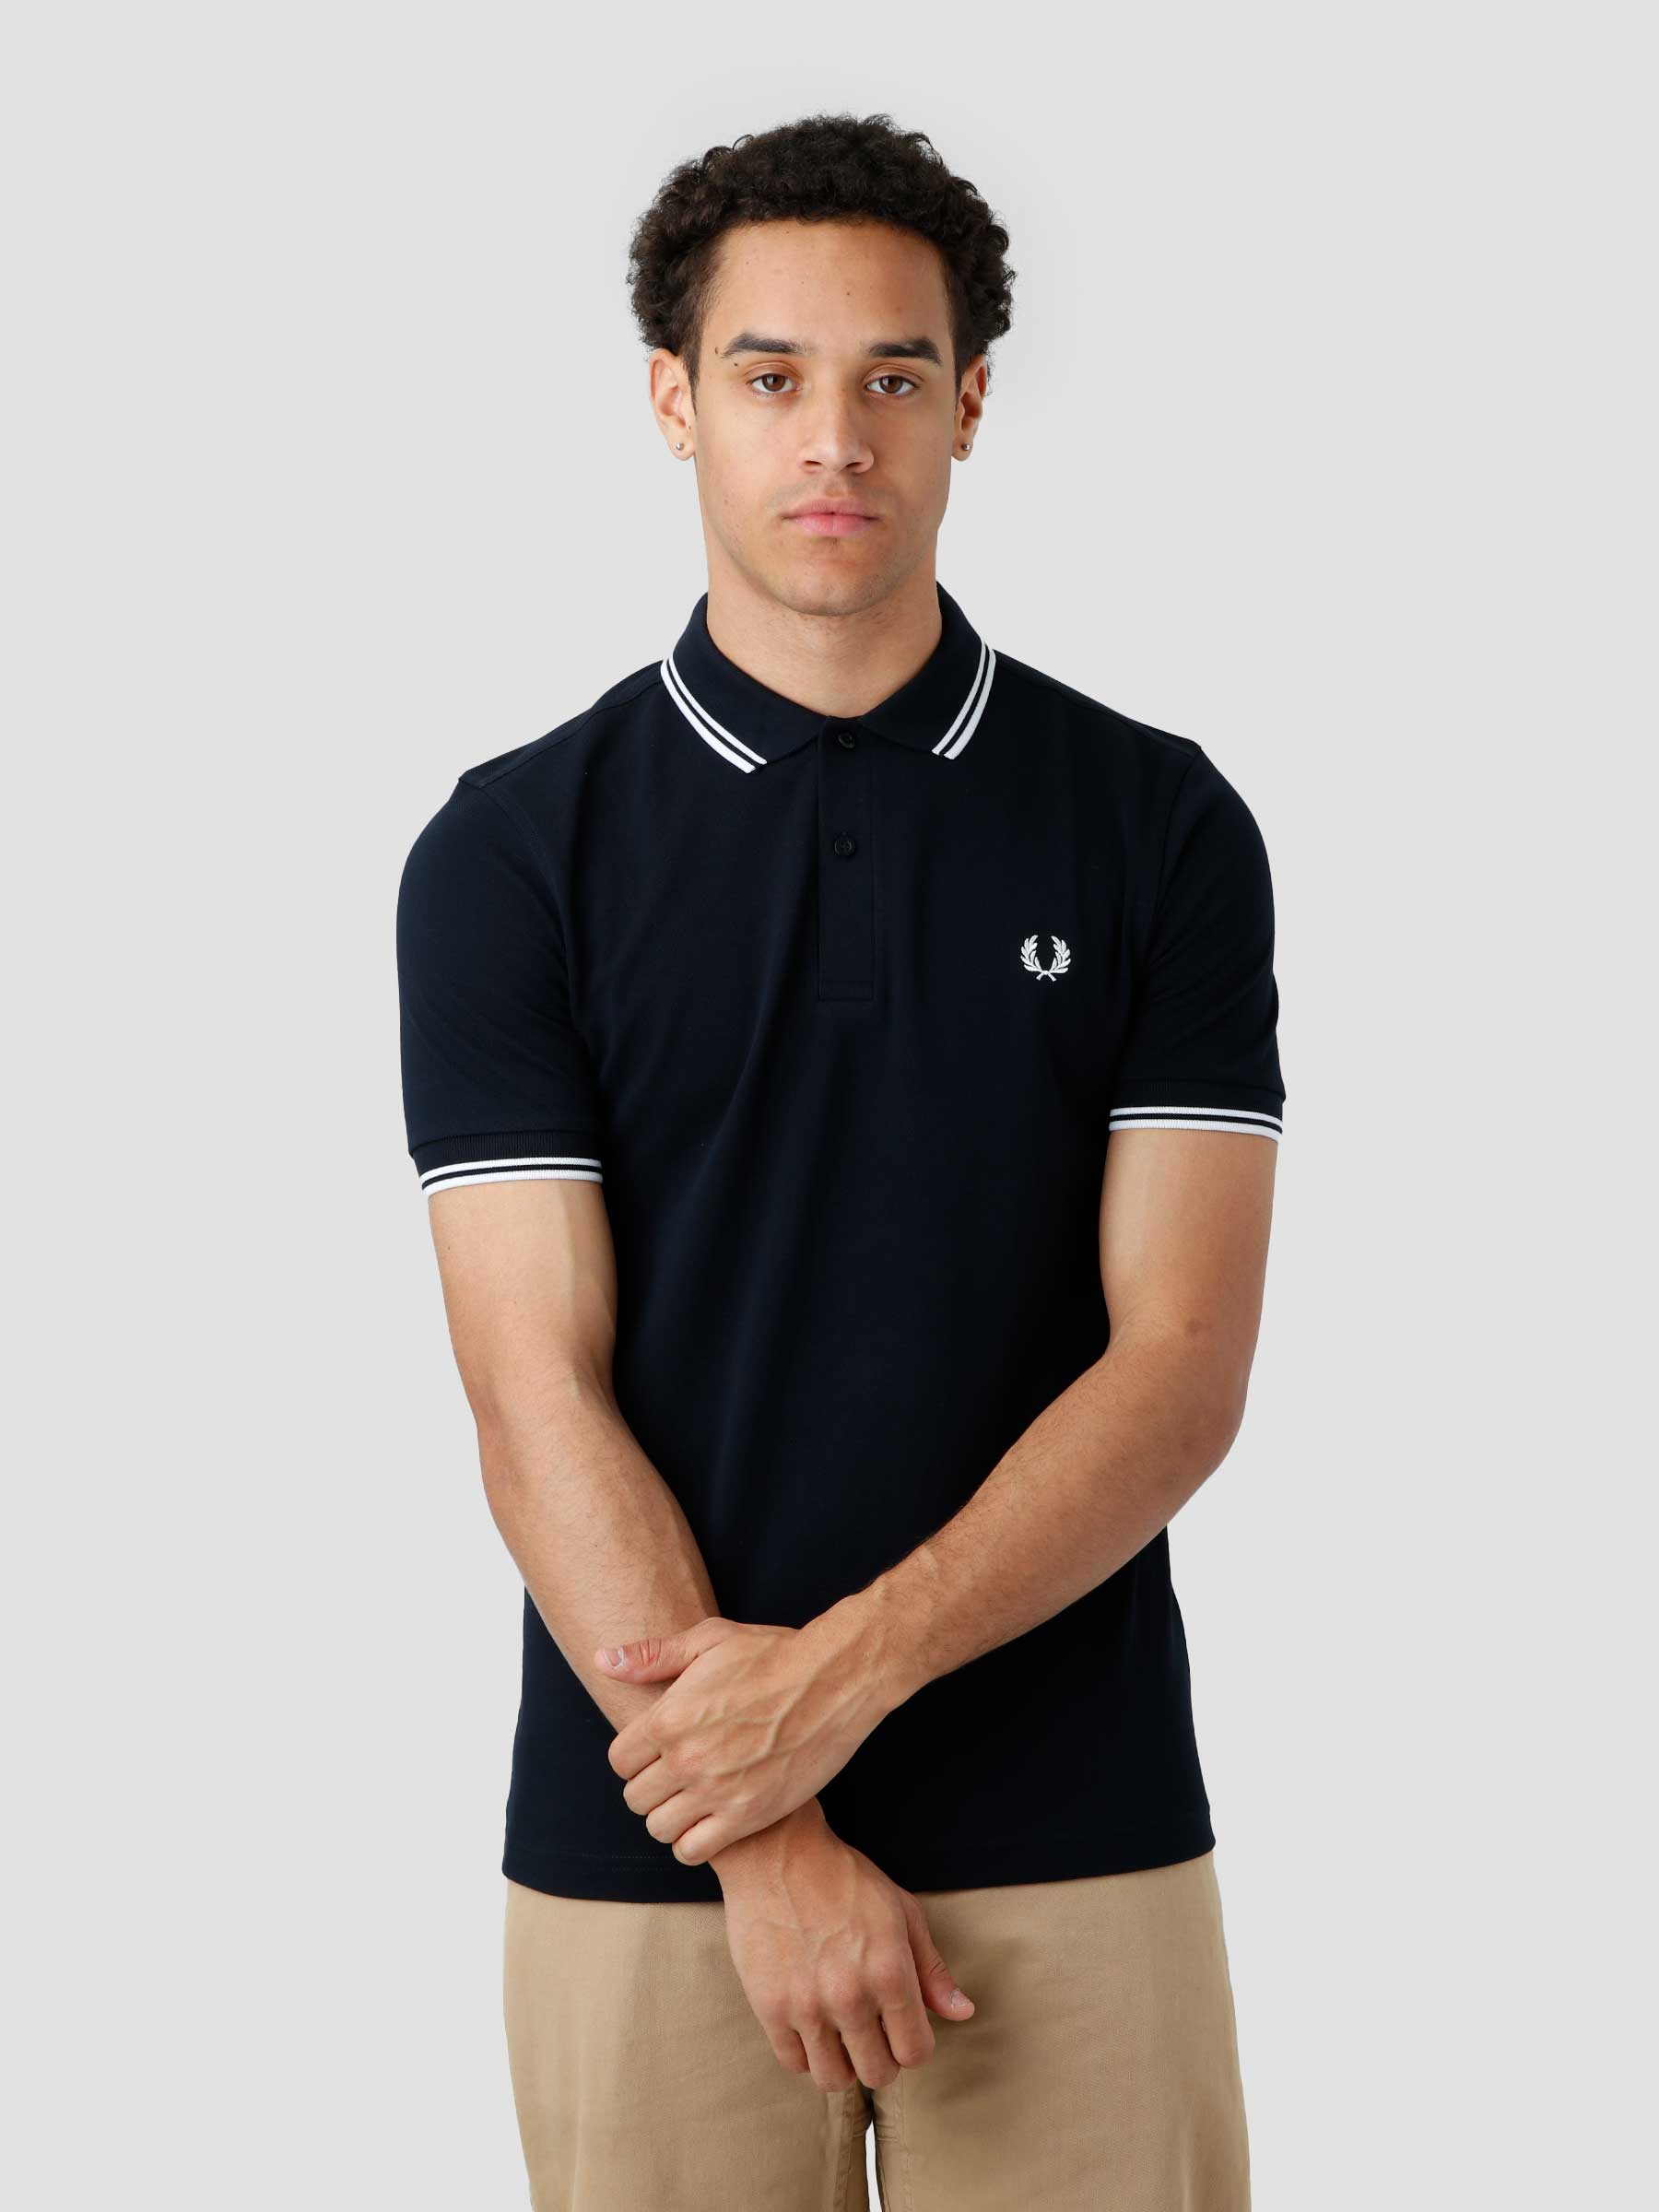 Absoluut goedkeuren werper Fred Perry Twin Tipped Fred Perry Shirt Navy White M3600-238 | Freshcotton